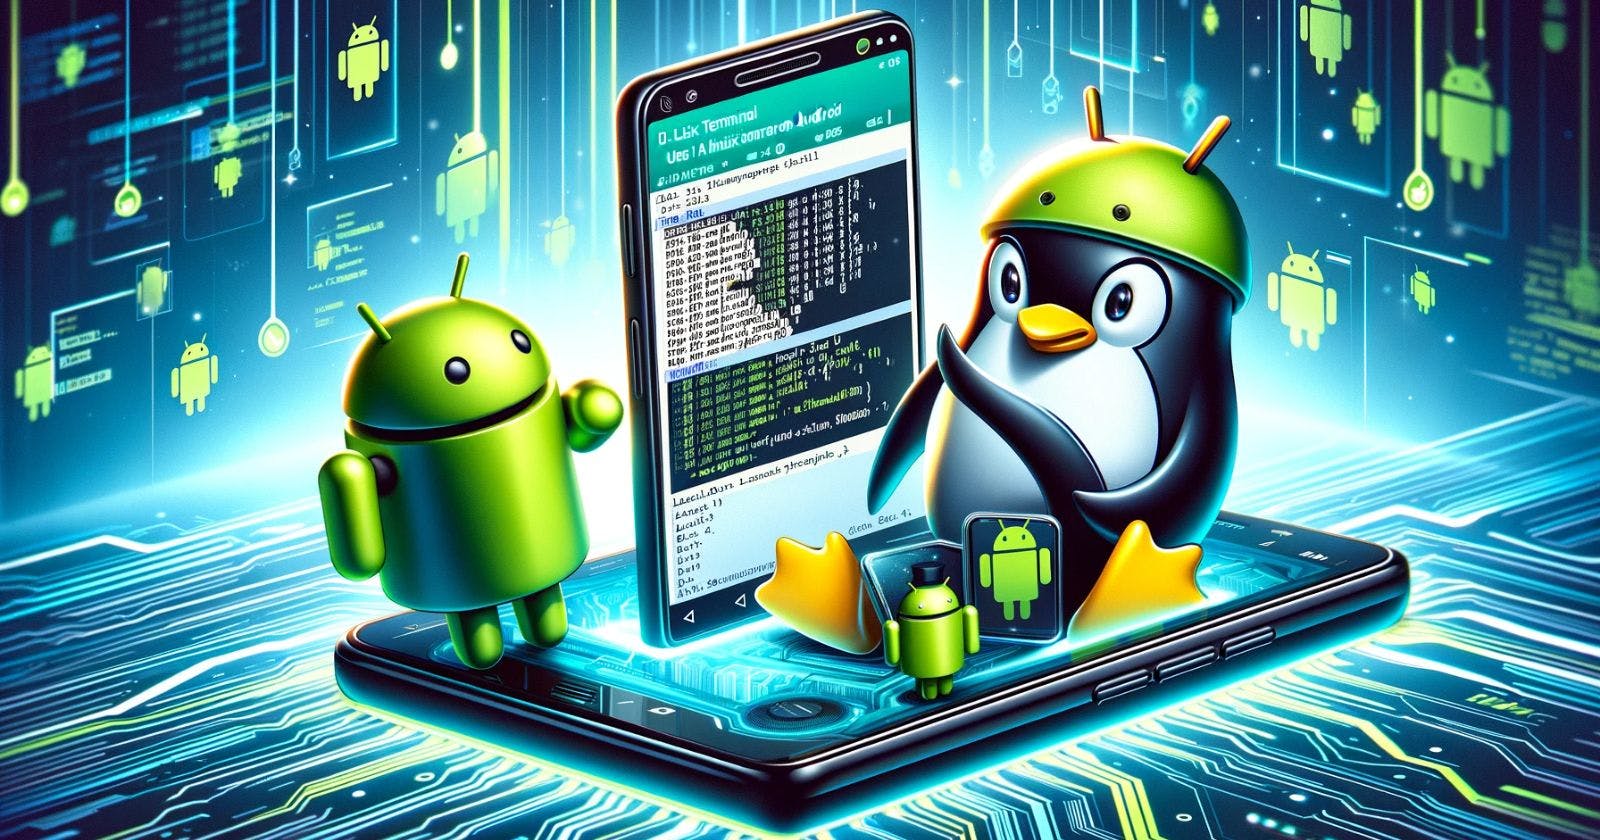 Using a Linux Terminal on Android - Exploring the Possibilities